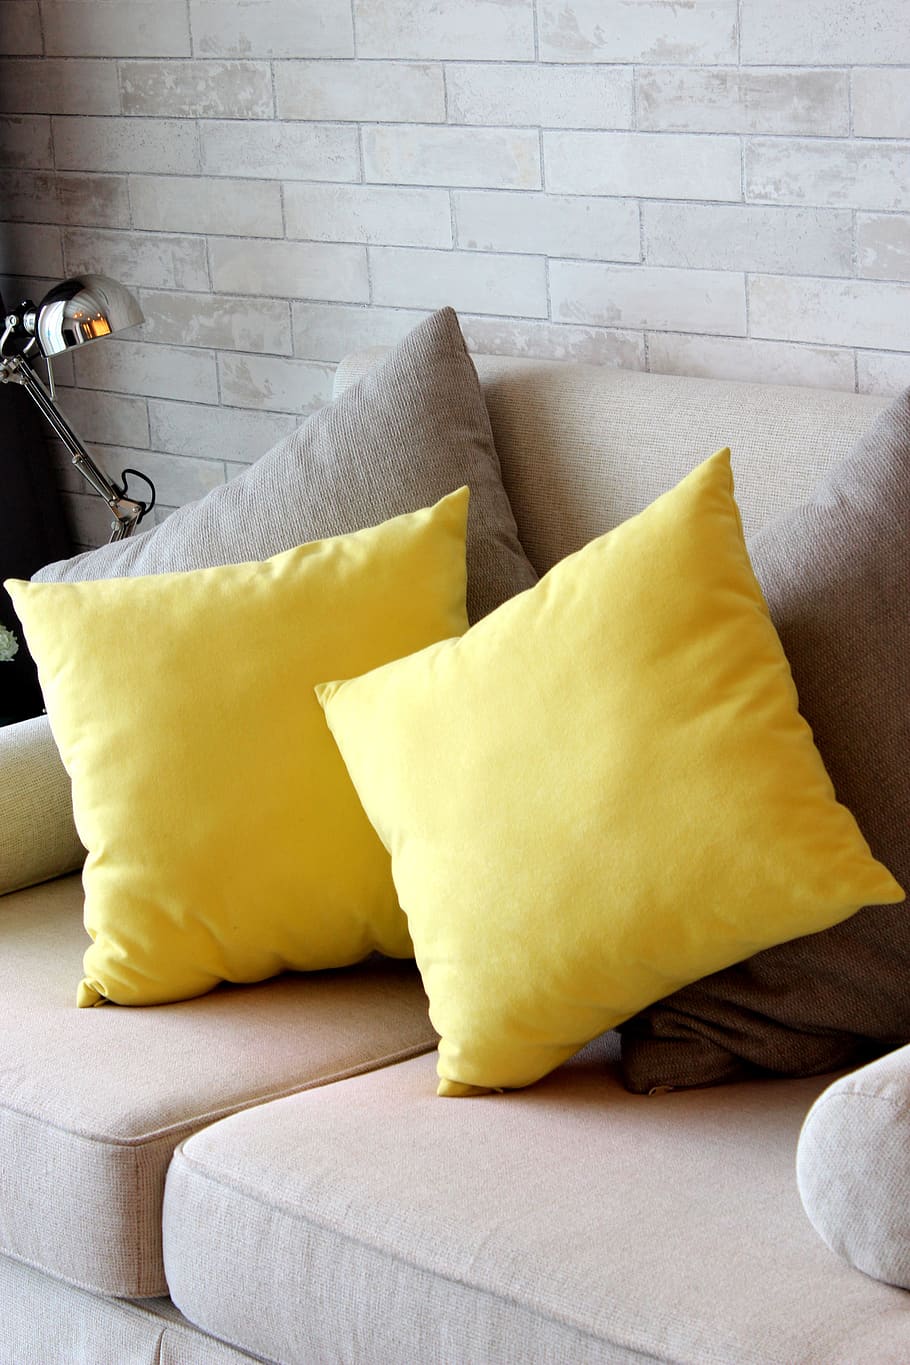 pillow, yellow, sofa, to relax, the format, cushion, comfort, tourism, condo, relax